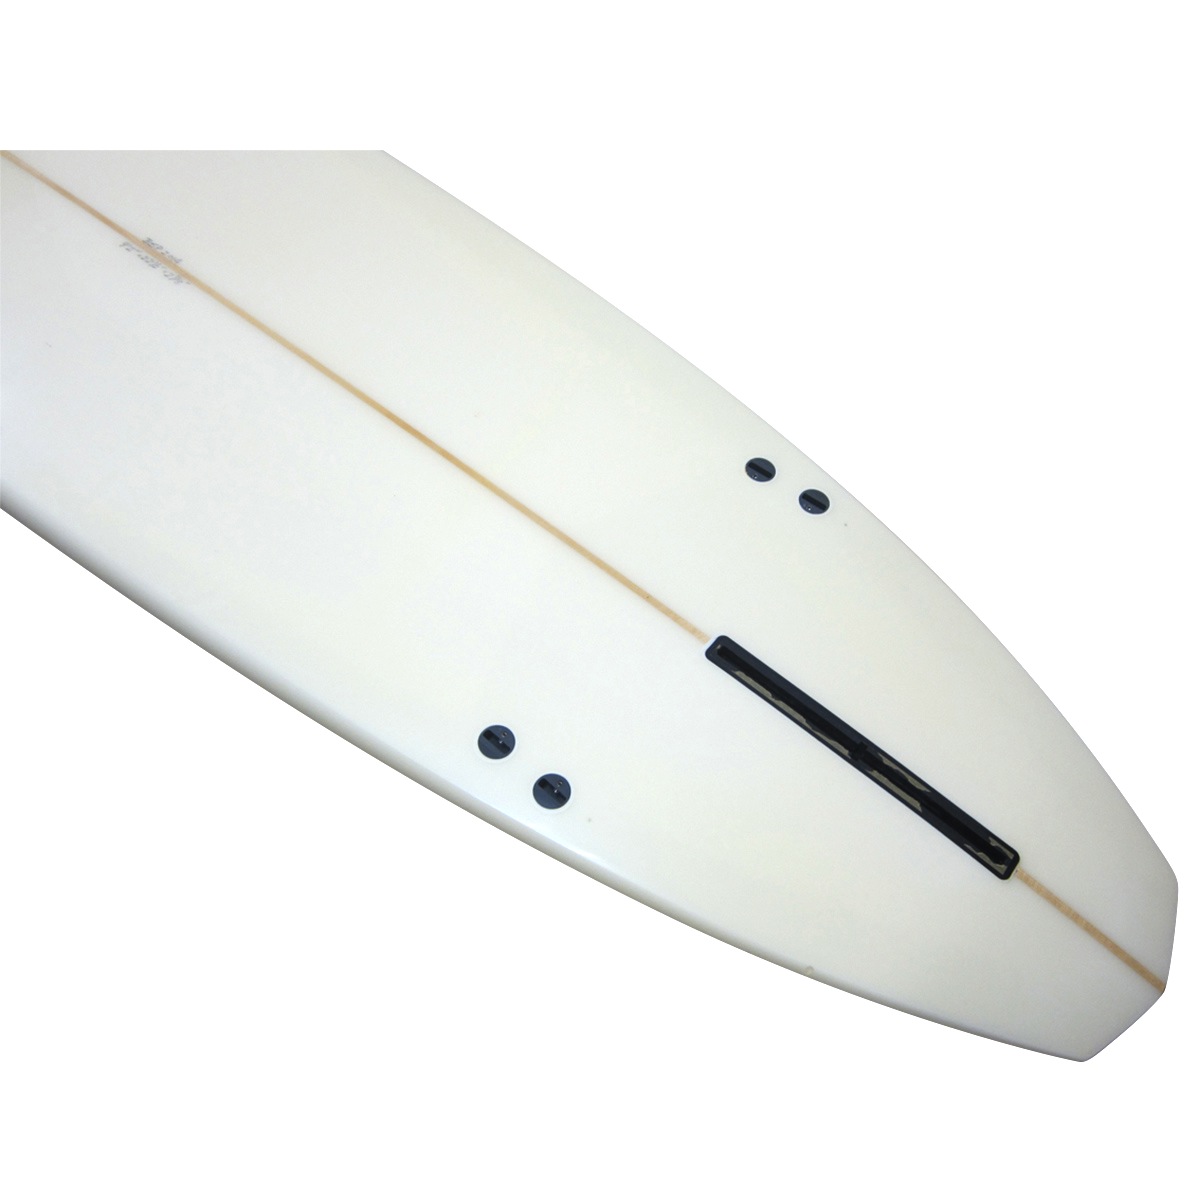 FB SURFBOARDS / ALL ROUND 9`2 